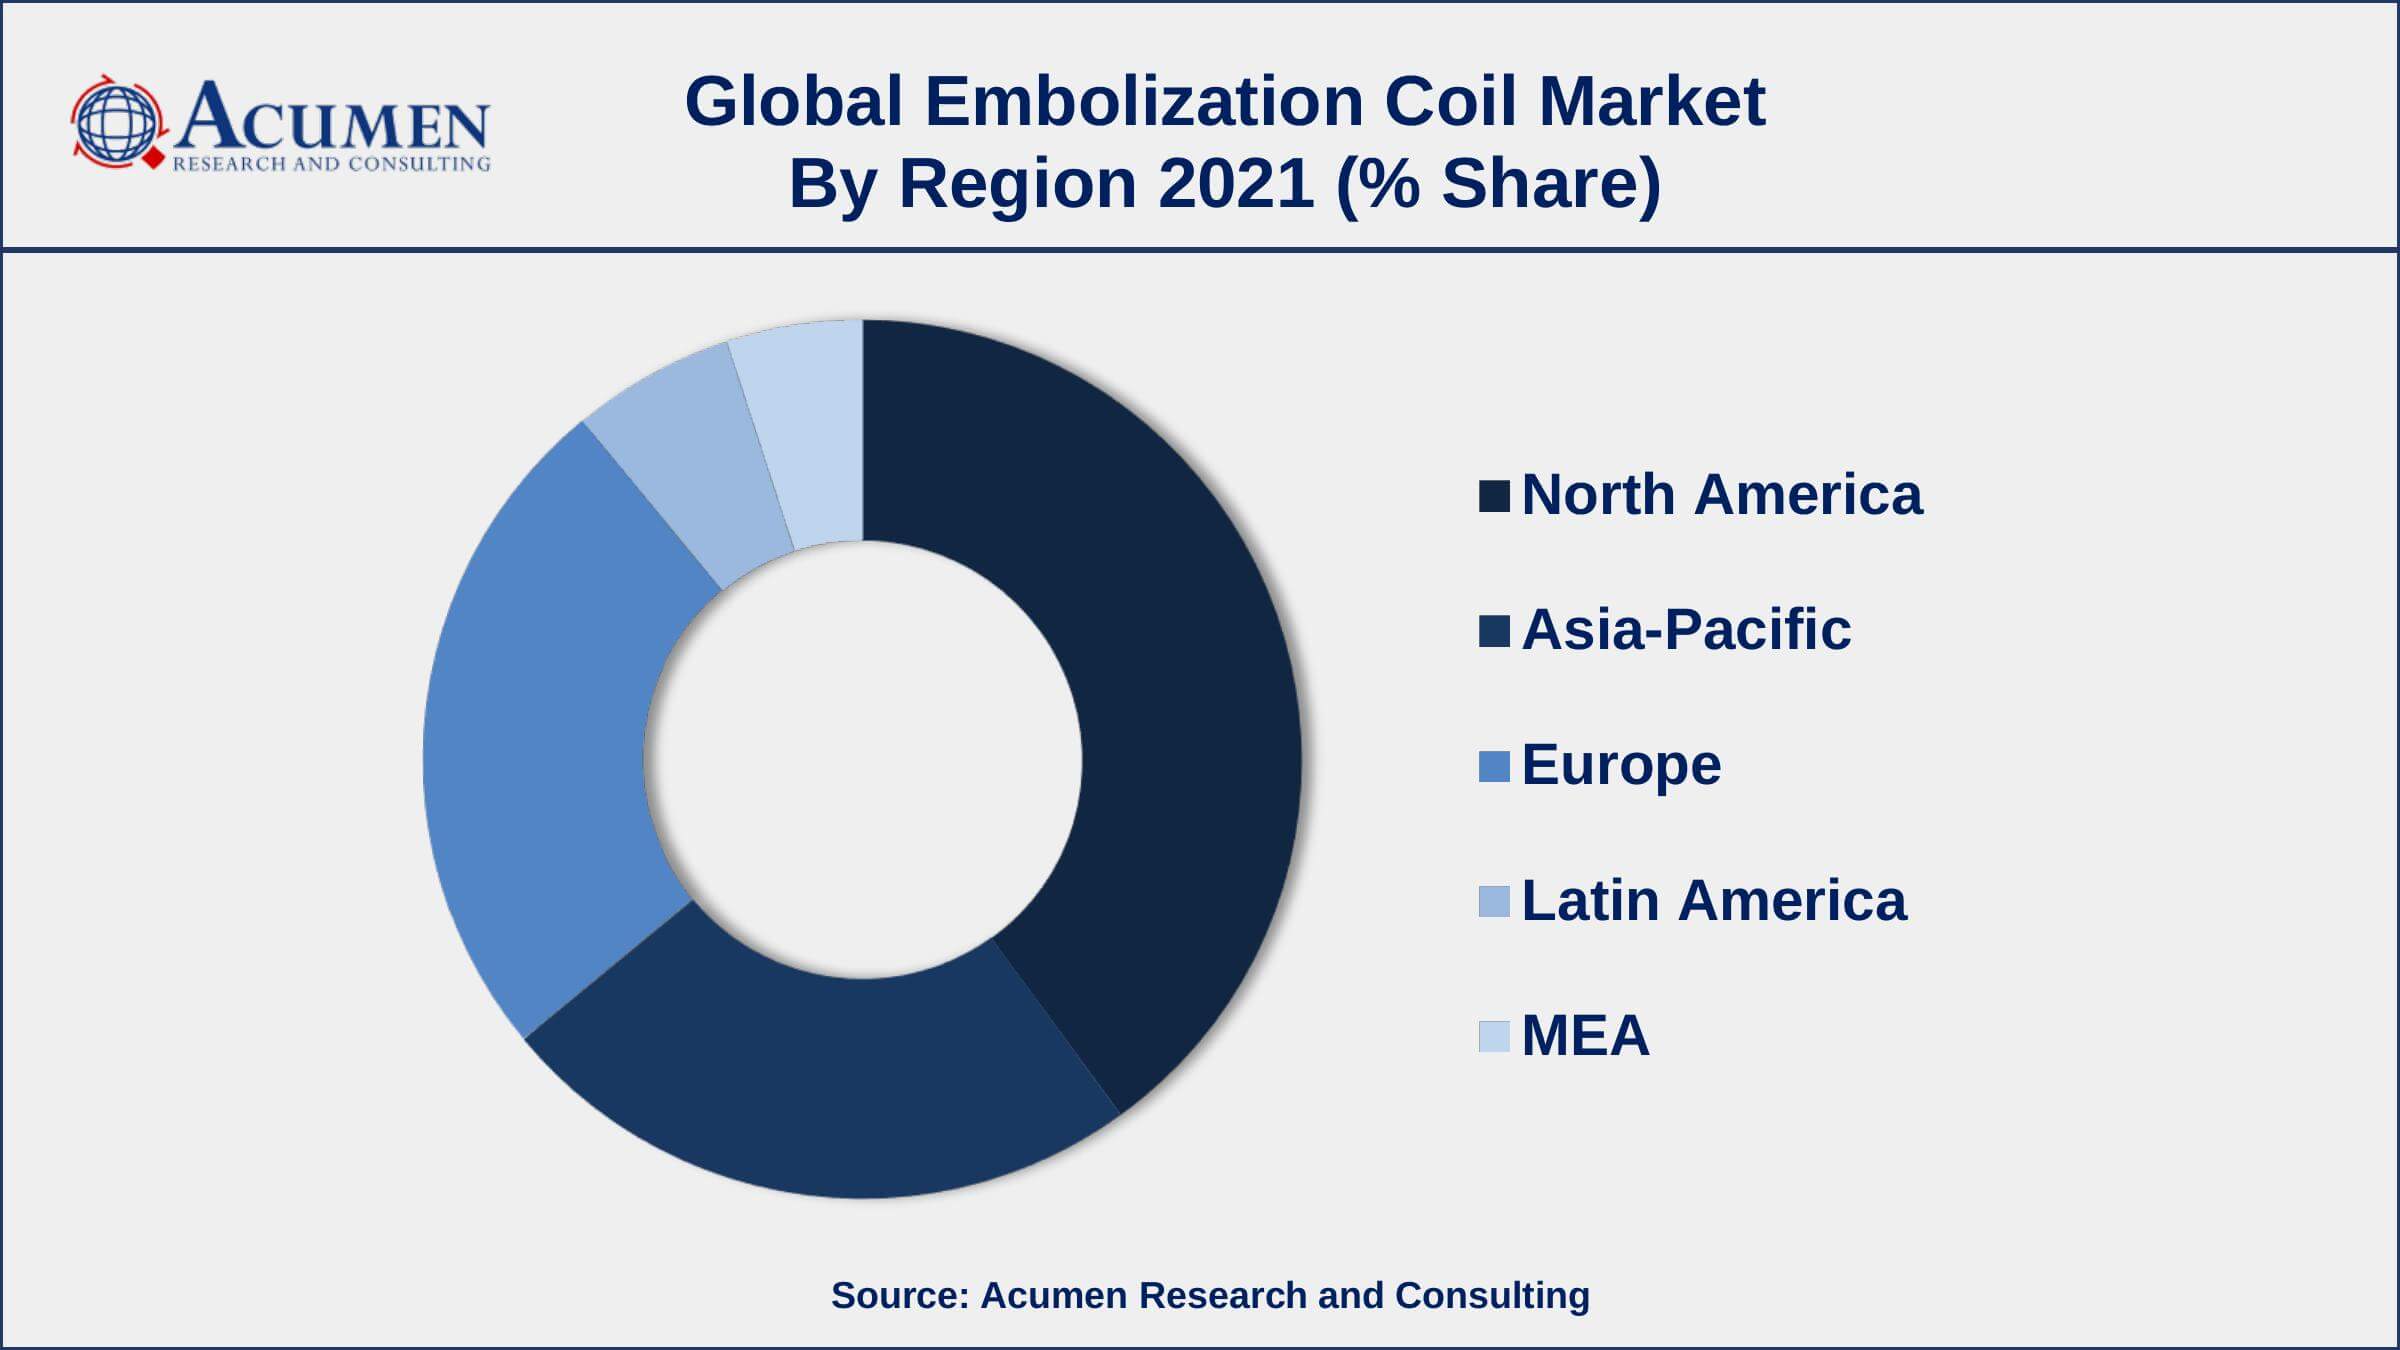 Rising adoption of minimally invasive procedures, drives the embolization coil market size